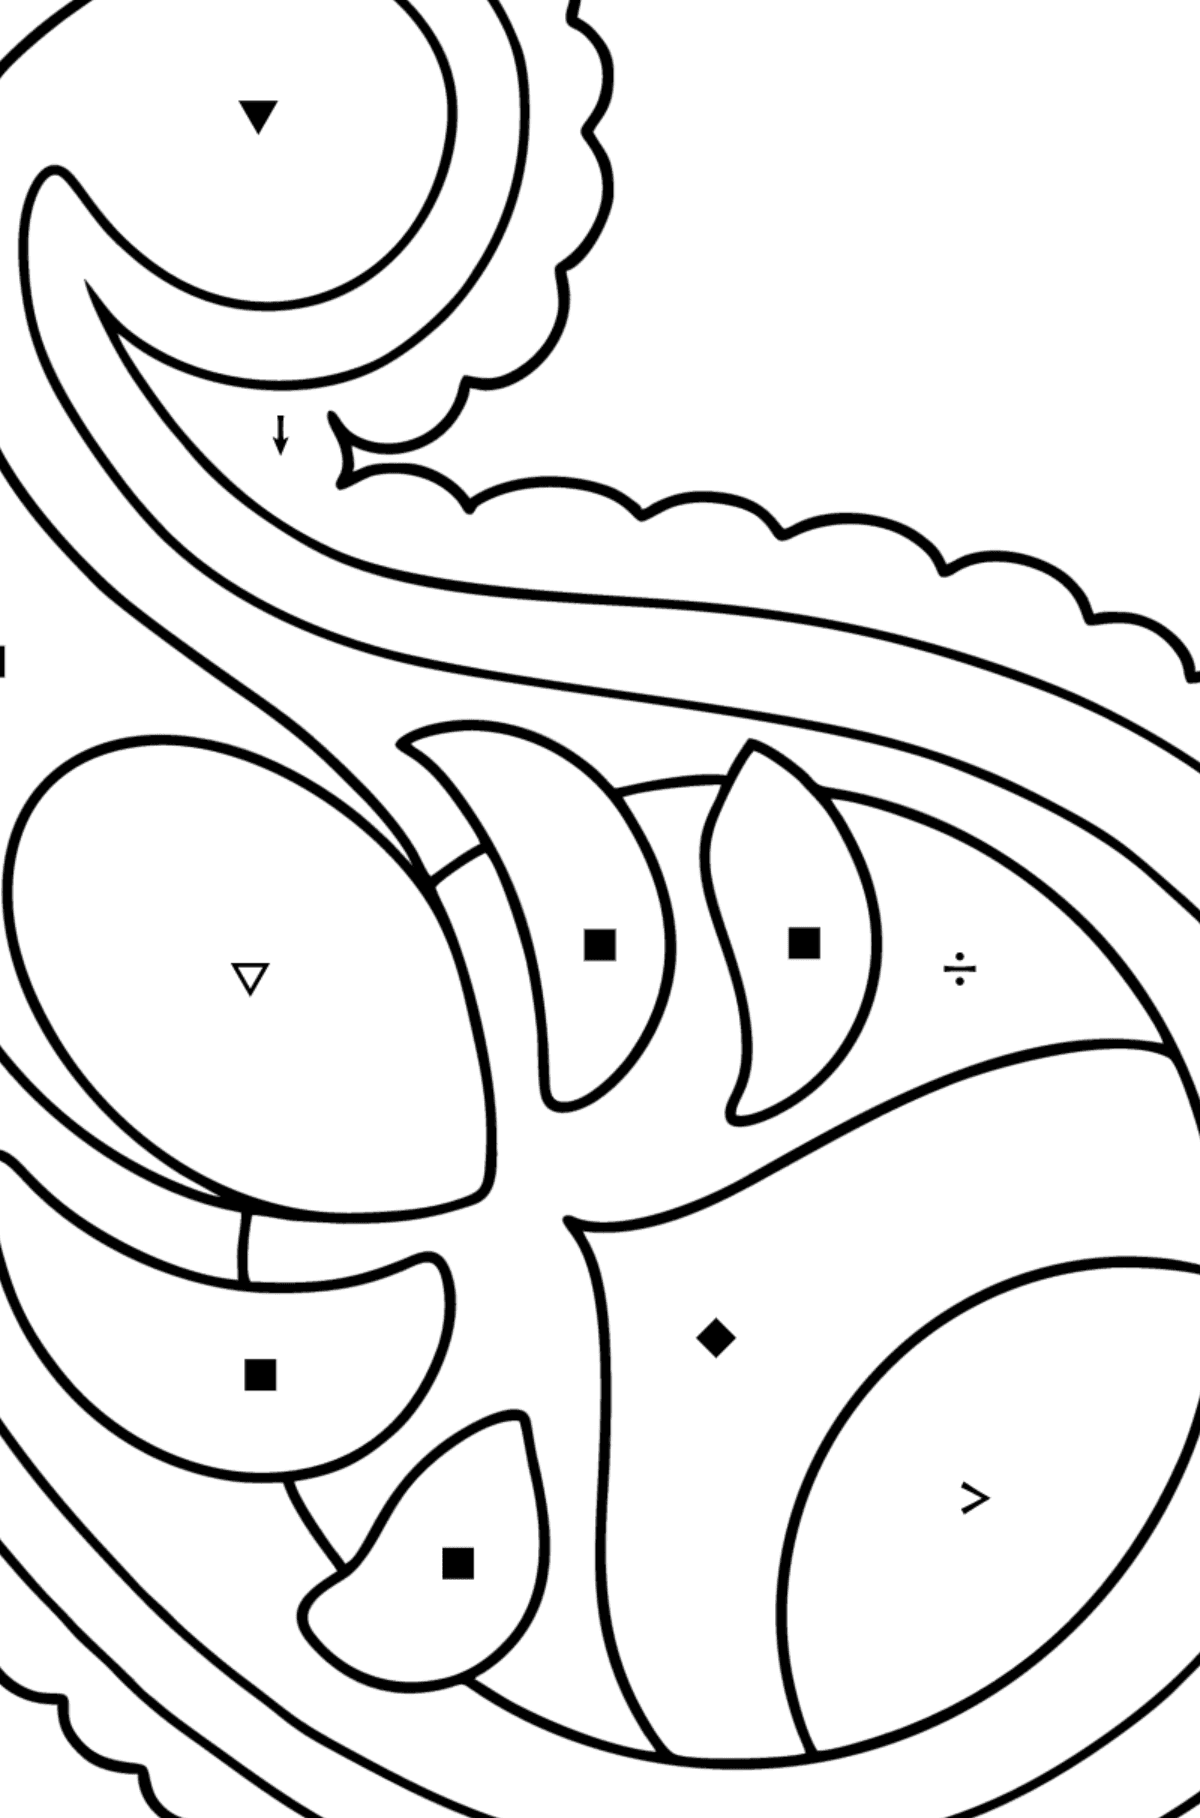 Paisley for Kids coloring page - Coloring by Symbols for Kids